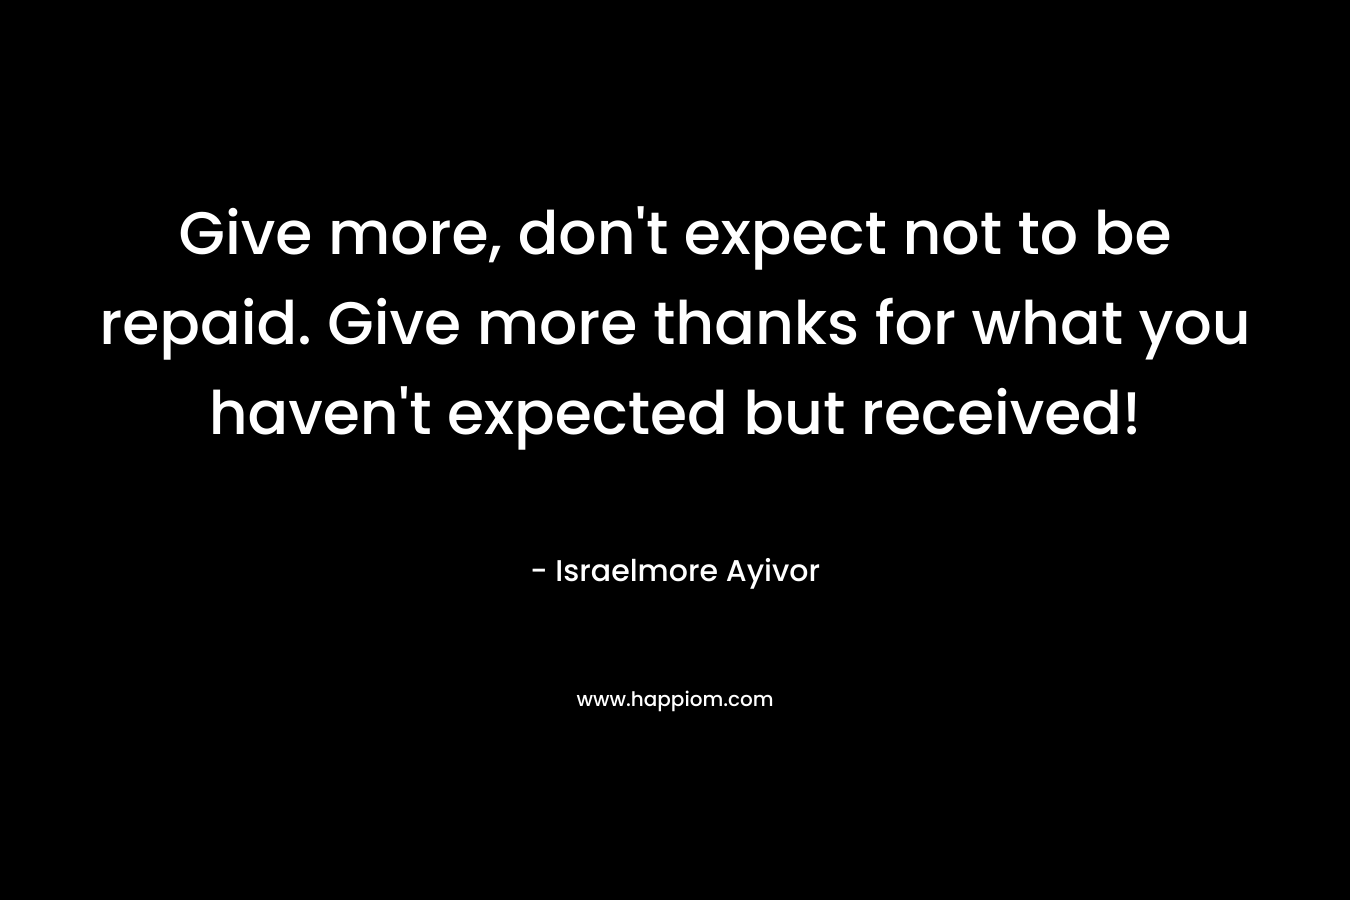 Give more, don't expect not to be repaid. Give more thanks for what you haven't expected but received!